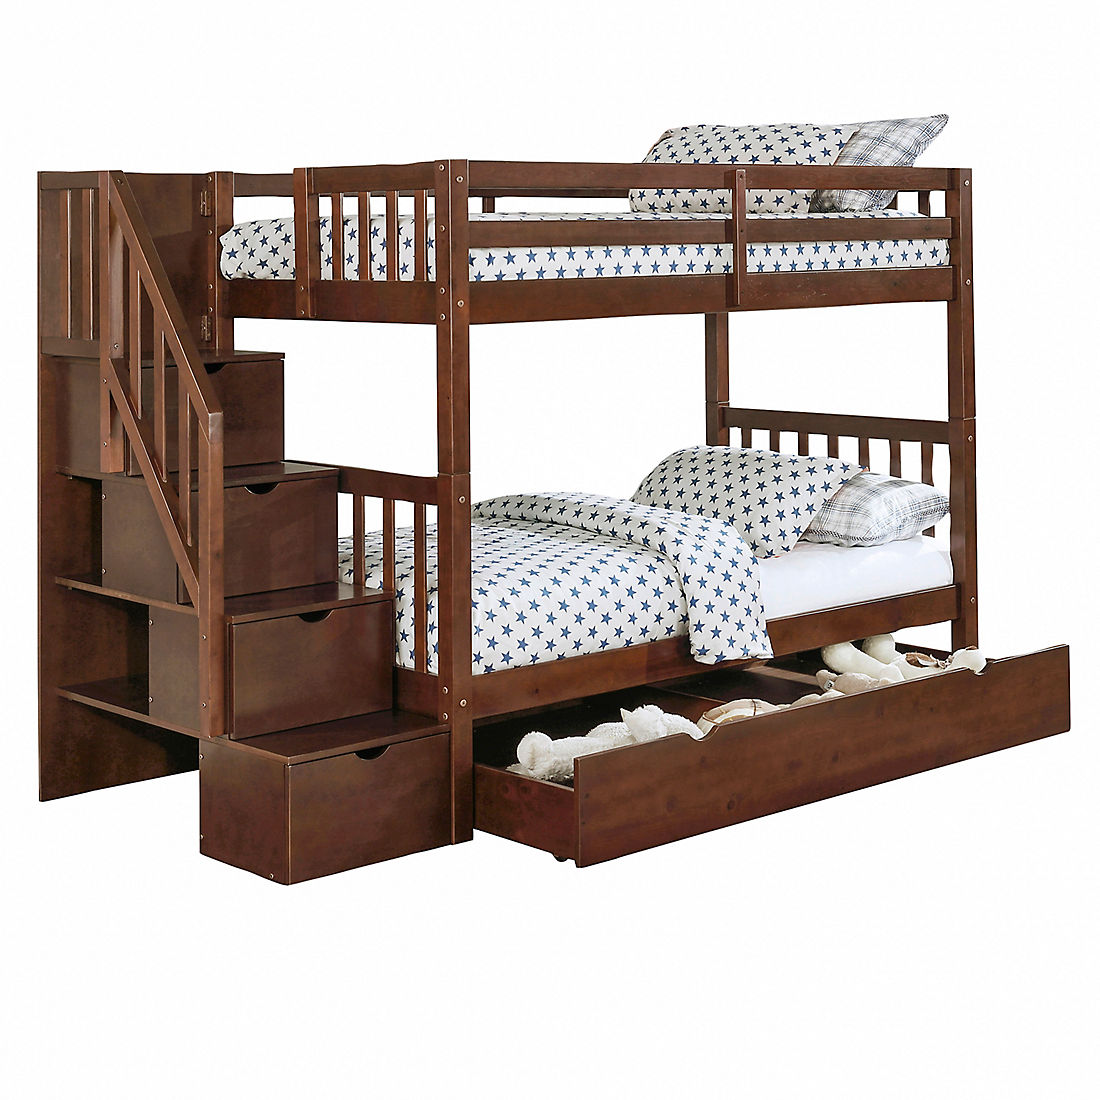 Berkley Jensen Twin Over Stairway, Rooms To Go Bunk Bed Assembly Instructions